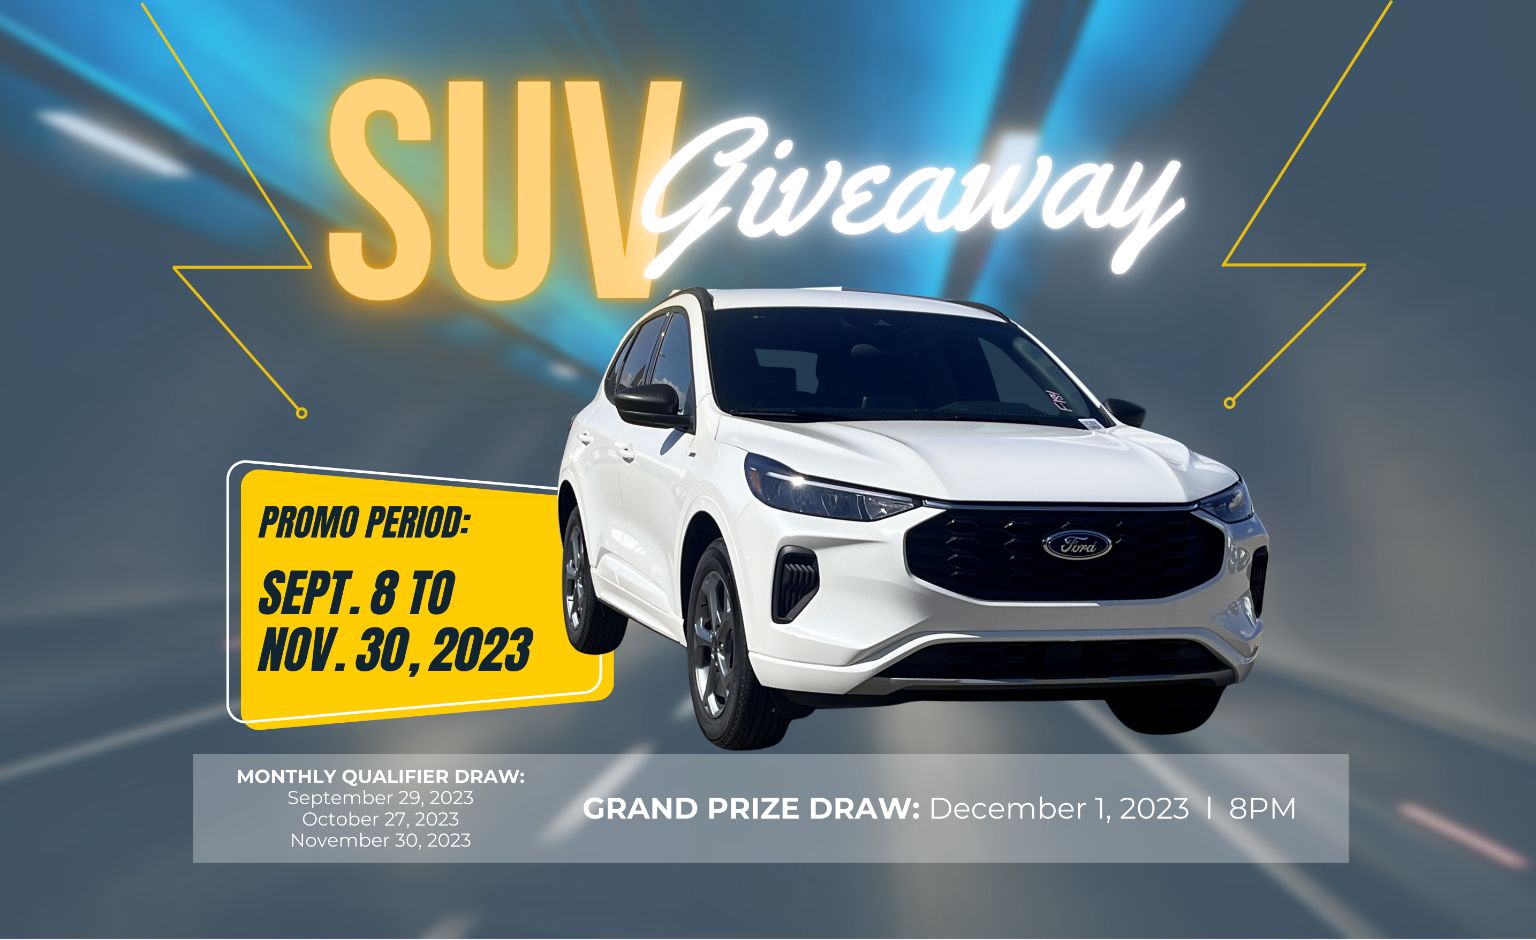 SUV Giveaway! Promo is from Sept. 8 to Nov. 30, 2023. JOIN NOW!